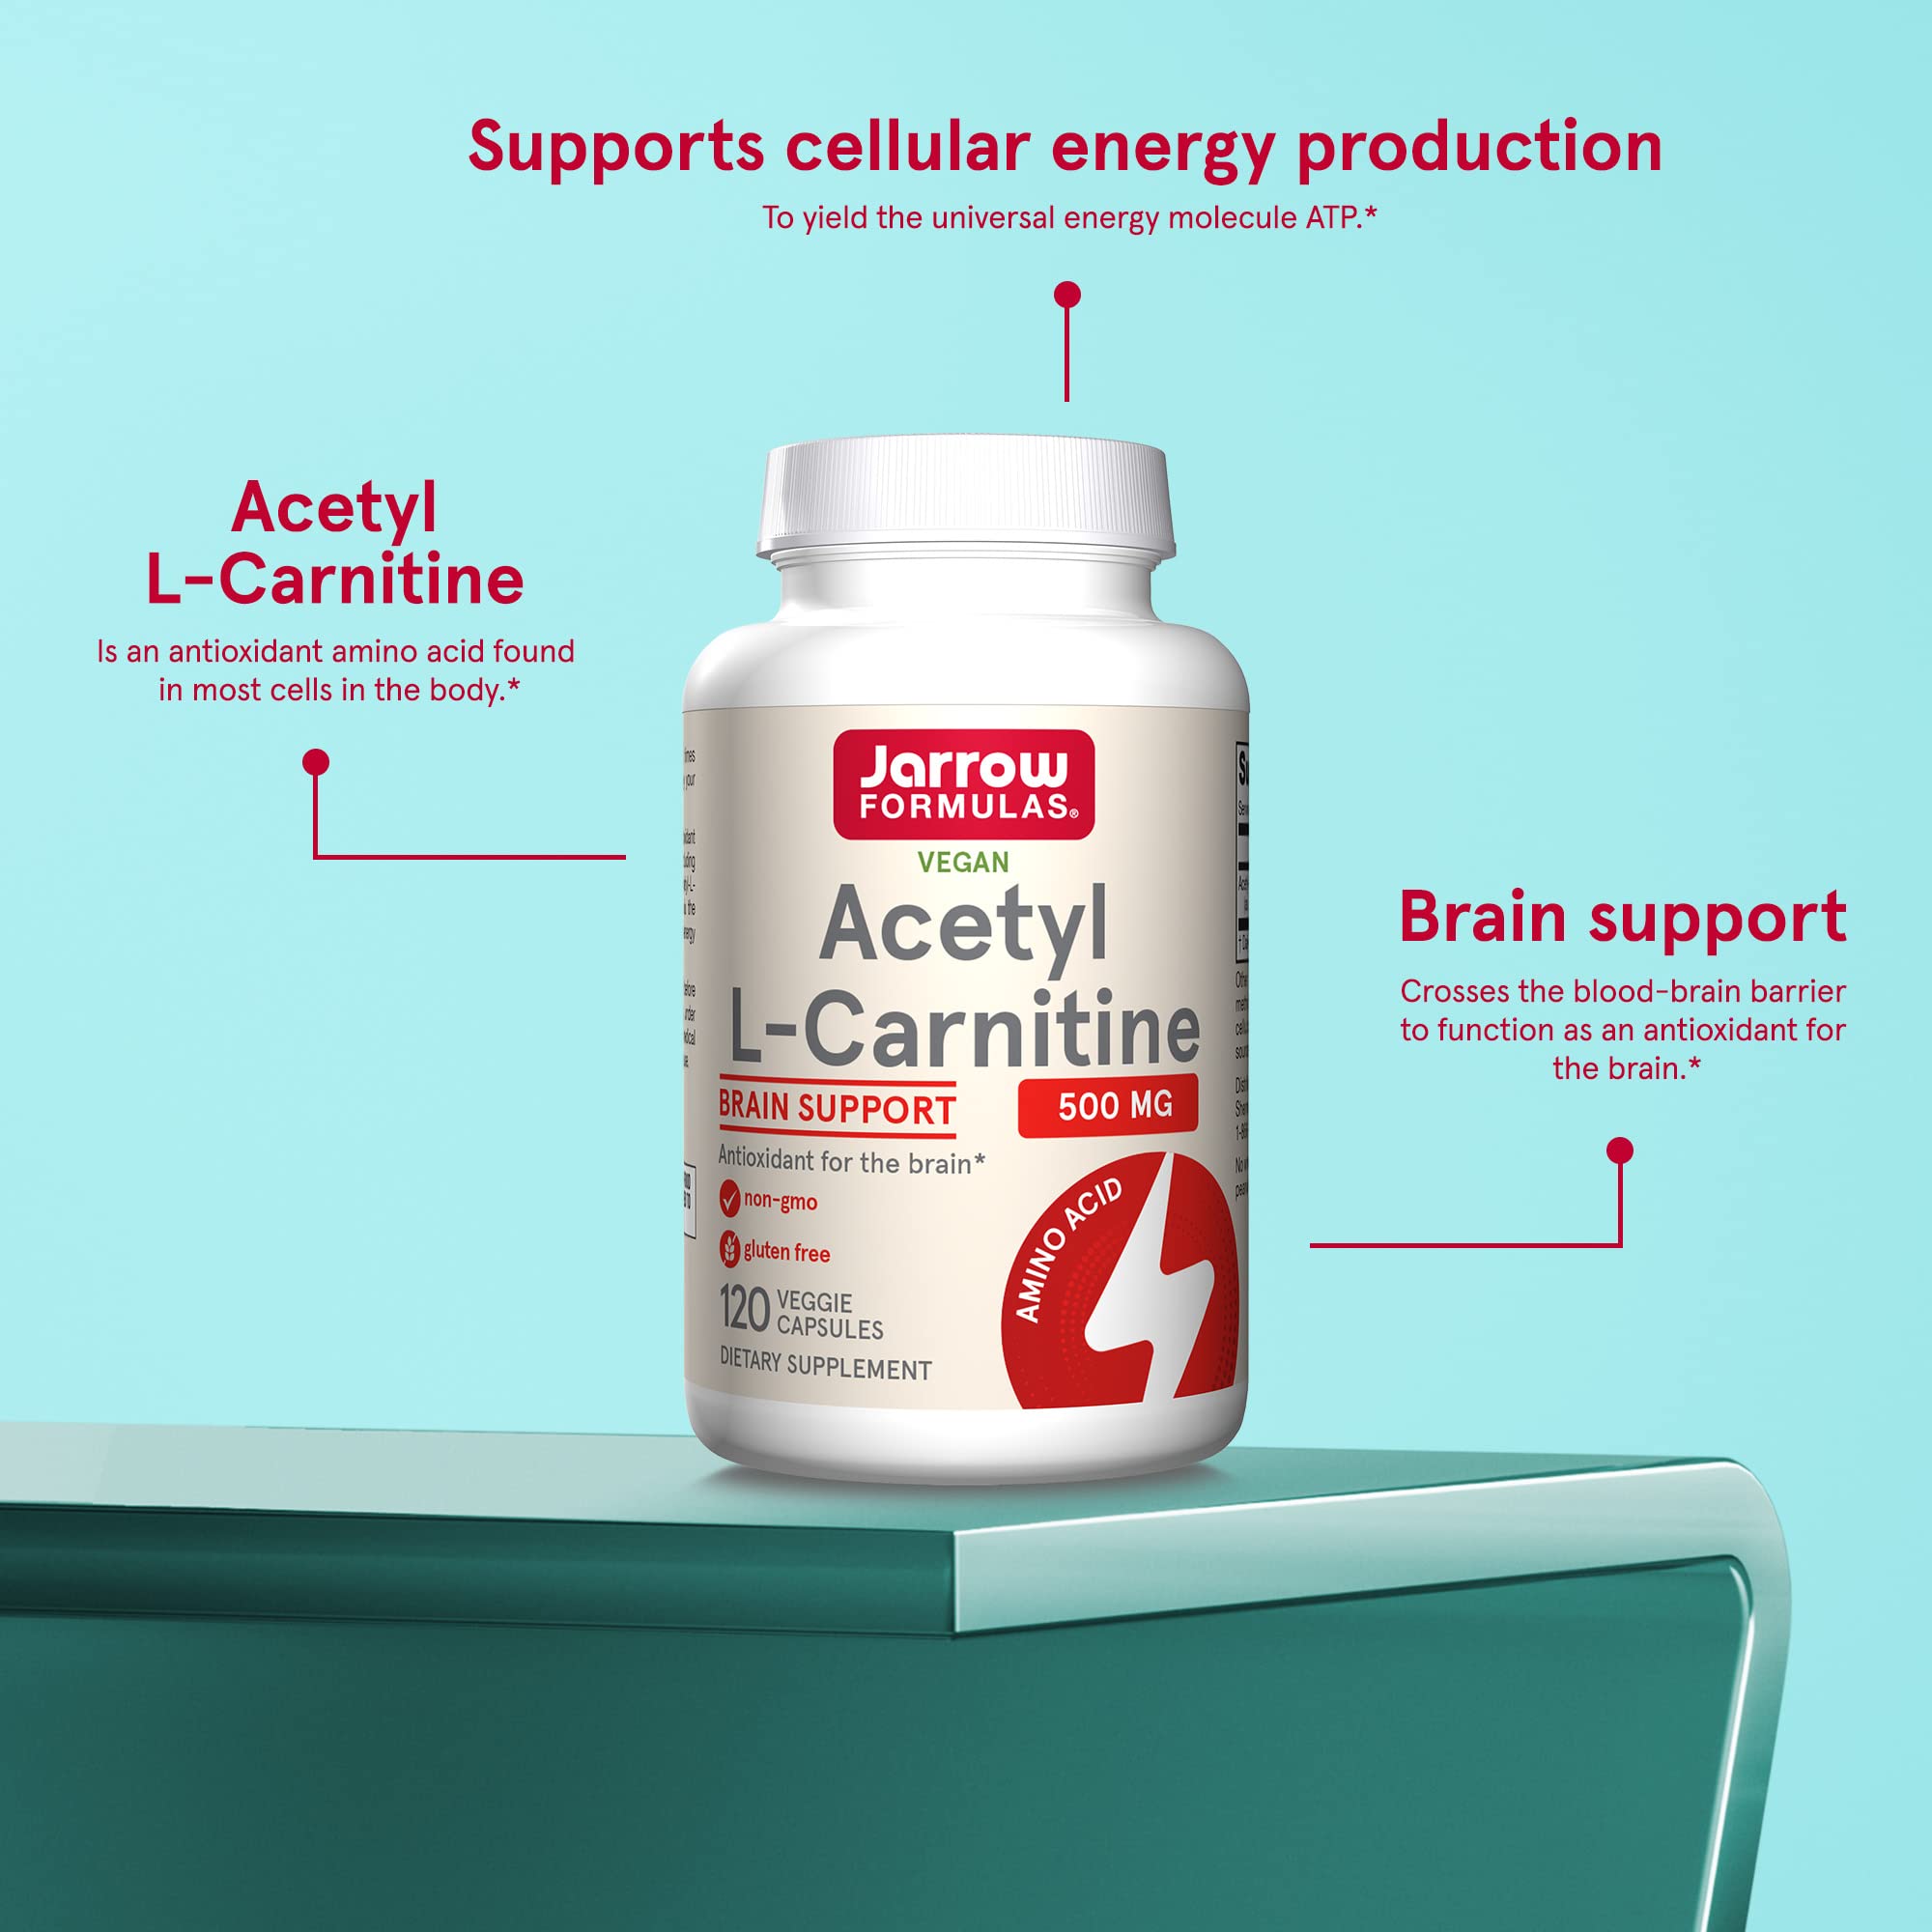 Jarrow Formulas Acetyl L-Carnitine 500 mg - Antioxidant Protection for the Brain - Supports Energy Production & Metabolism - Heart & Cardiovascular Health - 120 Veggie Capsules (PACKAGING MAY VARY)